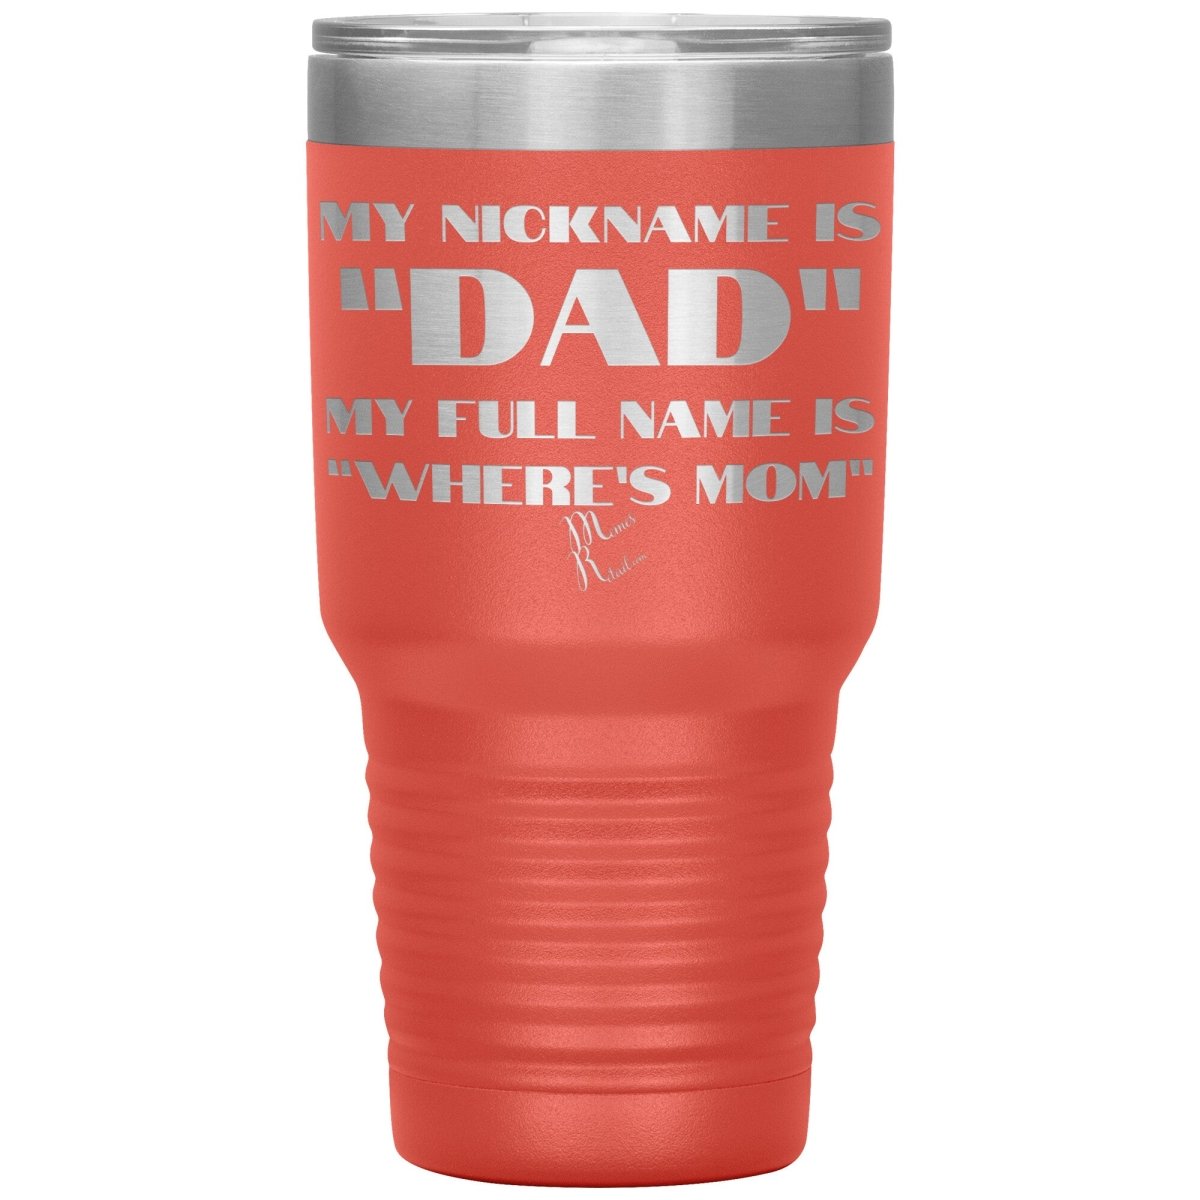 My Nickname is "Dad", My Full Name is "Where's Mom" Tumblers, 30oz Insulated Tumbler / Coral - MemesRetail.com